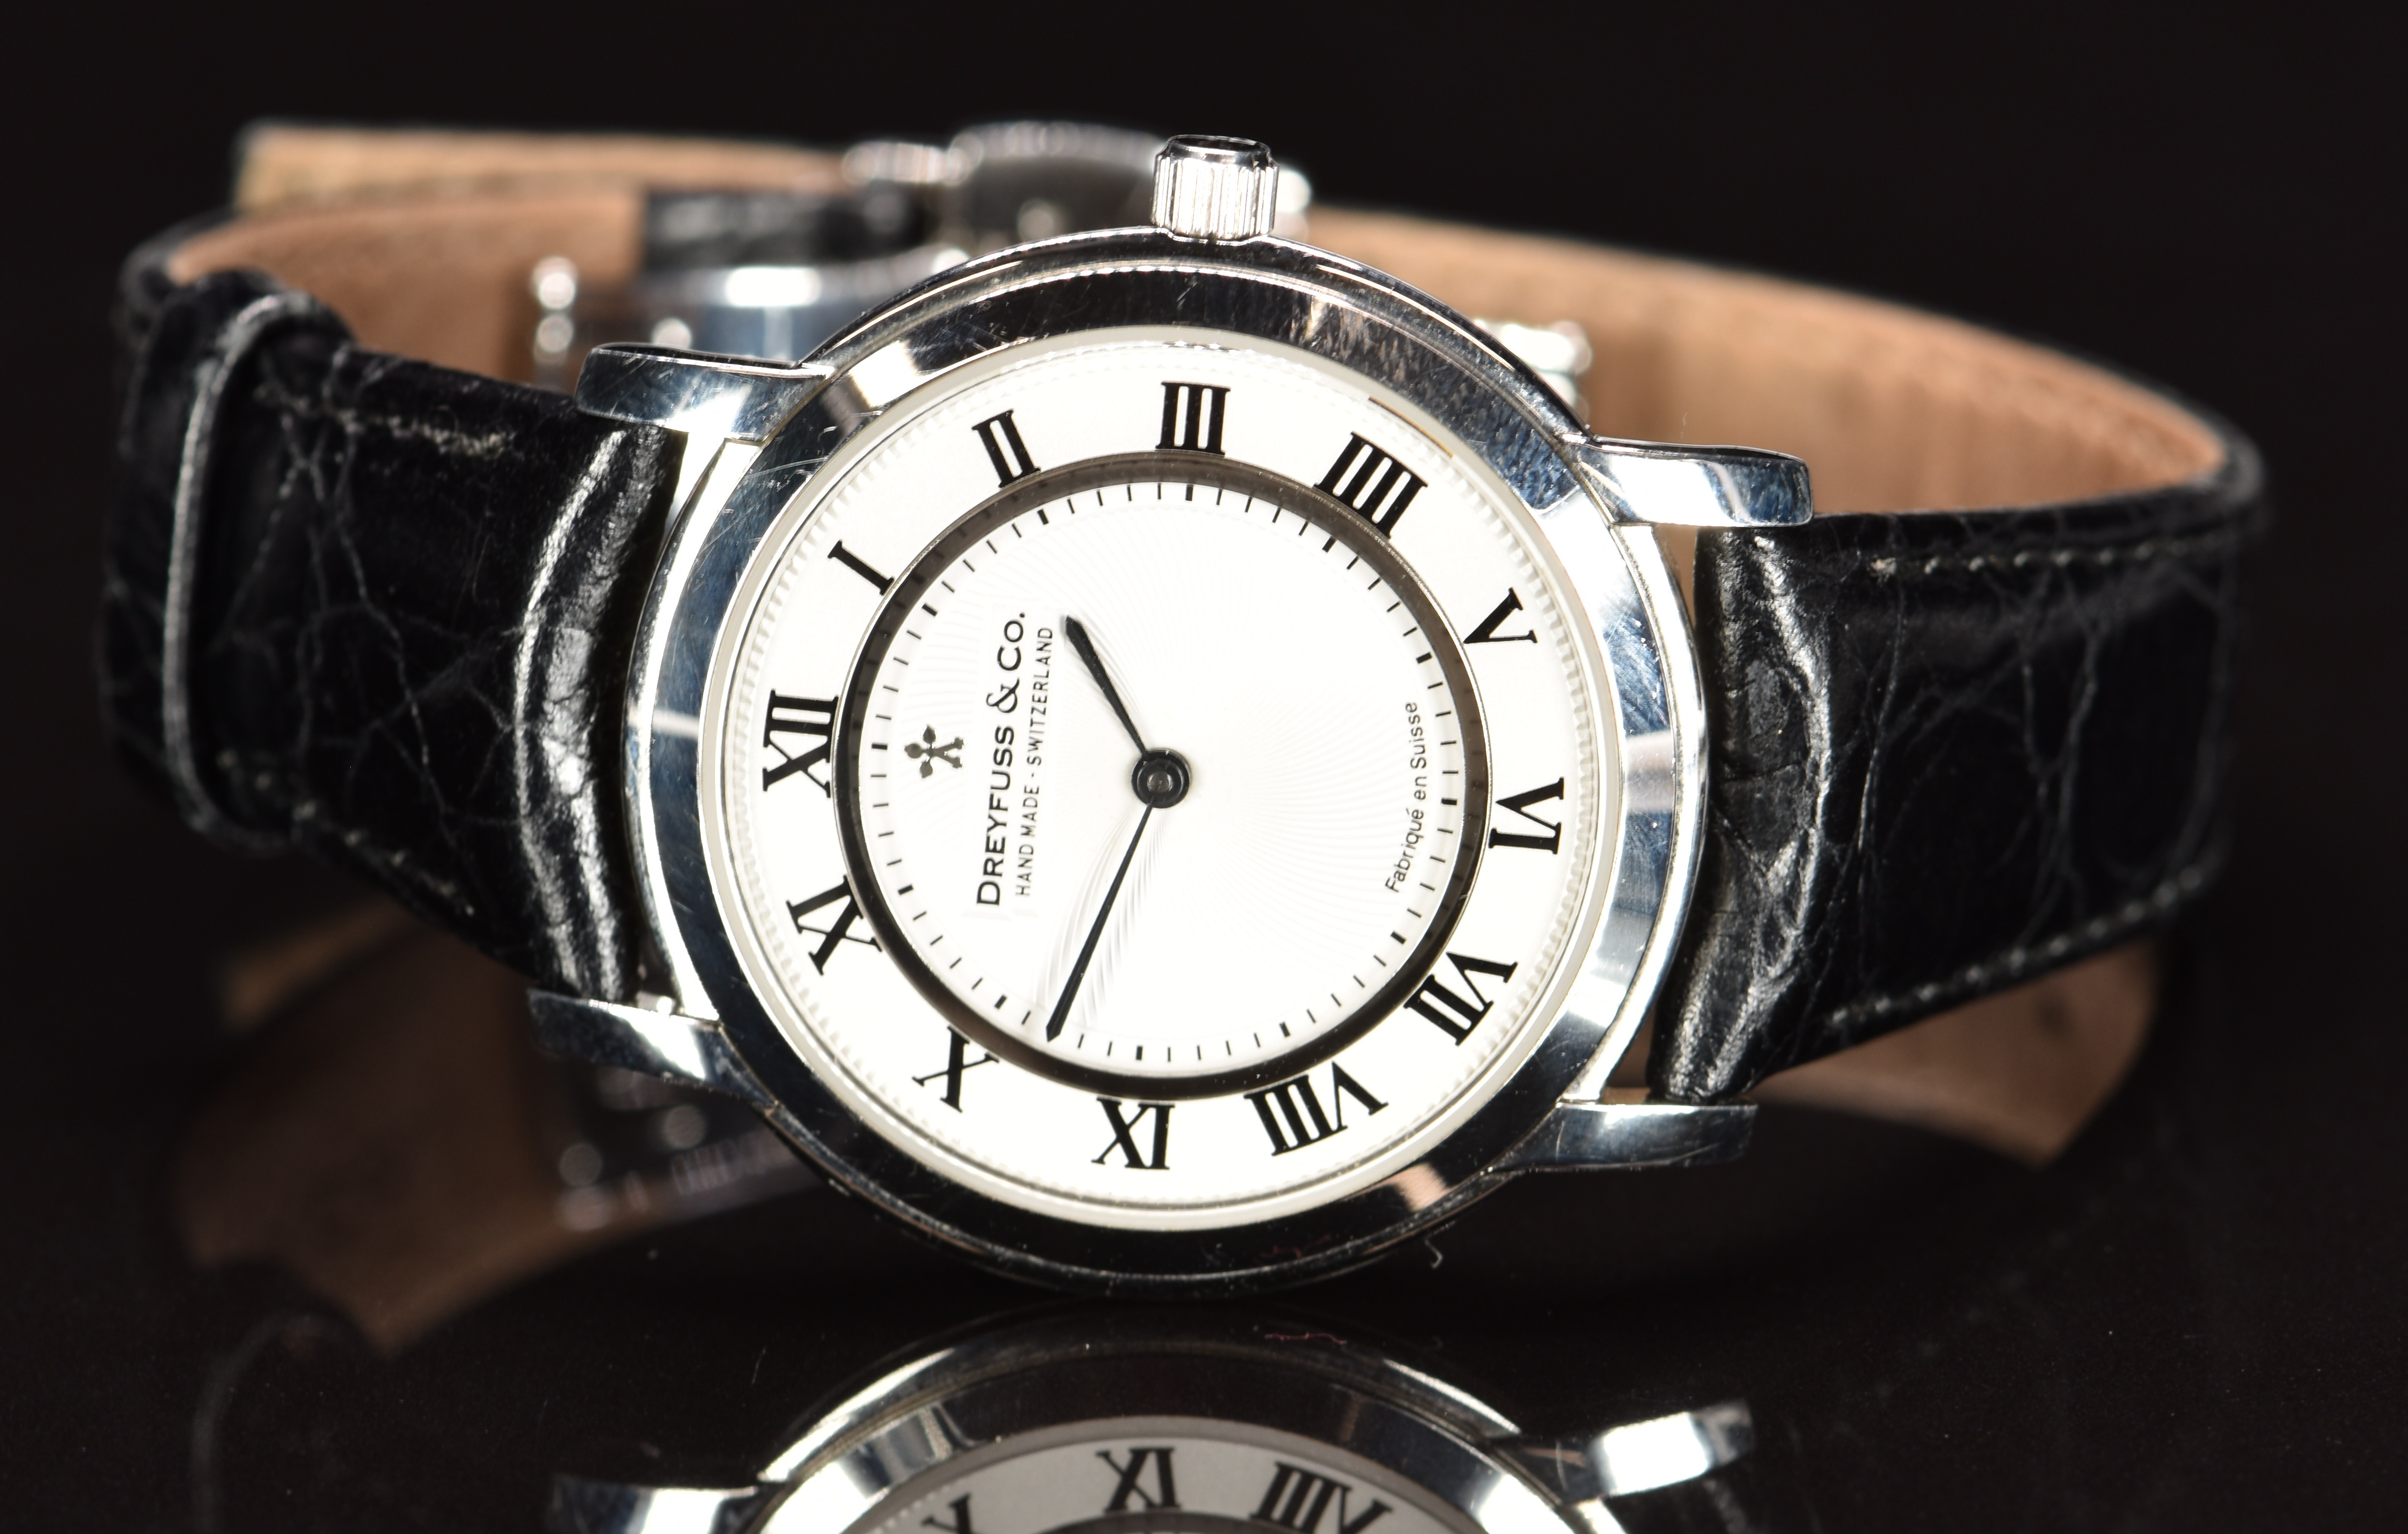 Dreyfuss & Co gentleman's wristwatch with blued hands, black Roman numerals, white dial, stainless - Image 4 of 6